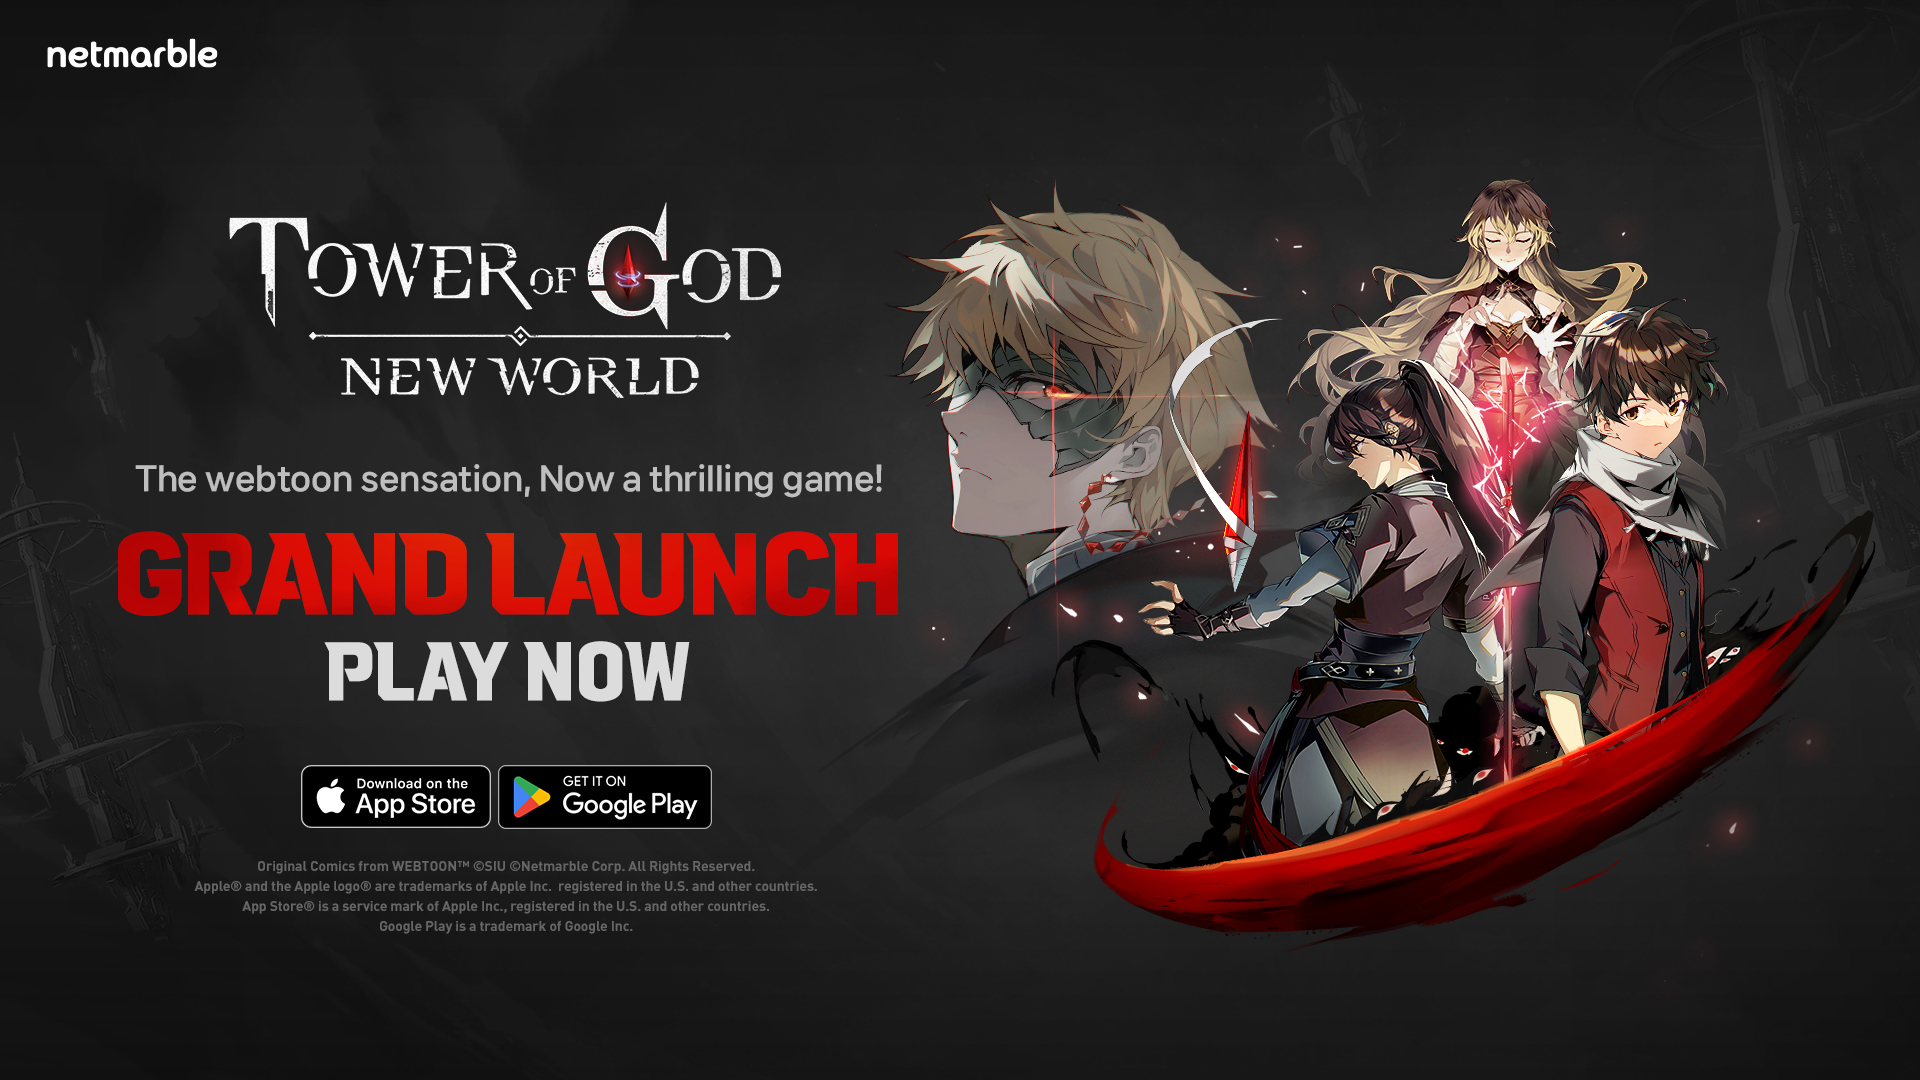 Tower of God: New World RPG ANNOUNCEMENT!! Release Date, Details